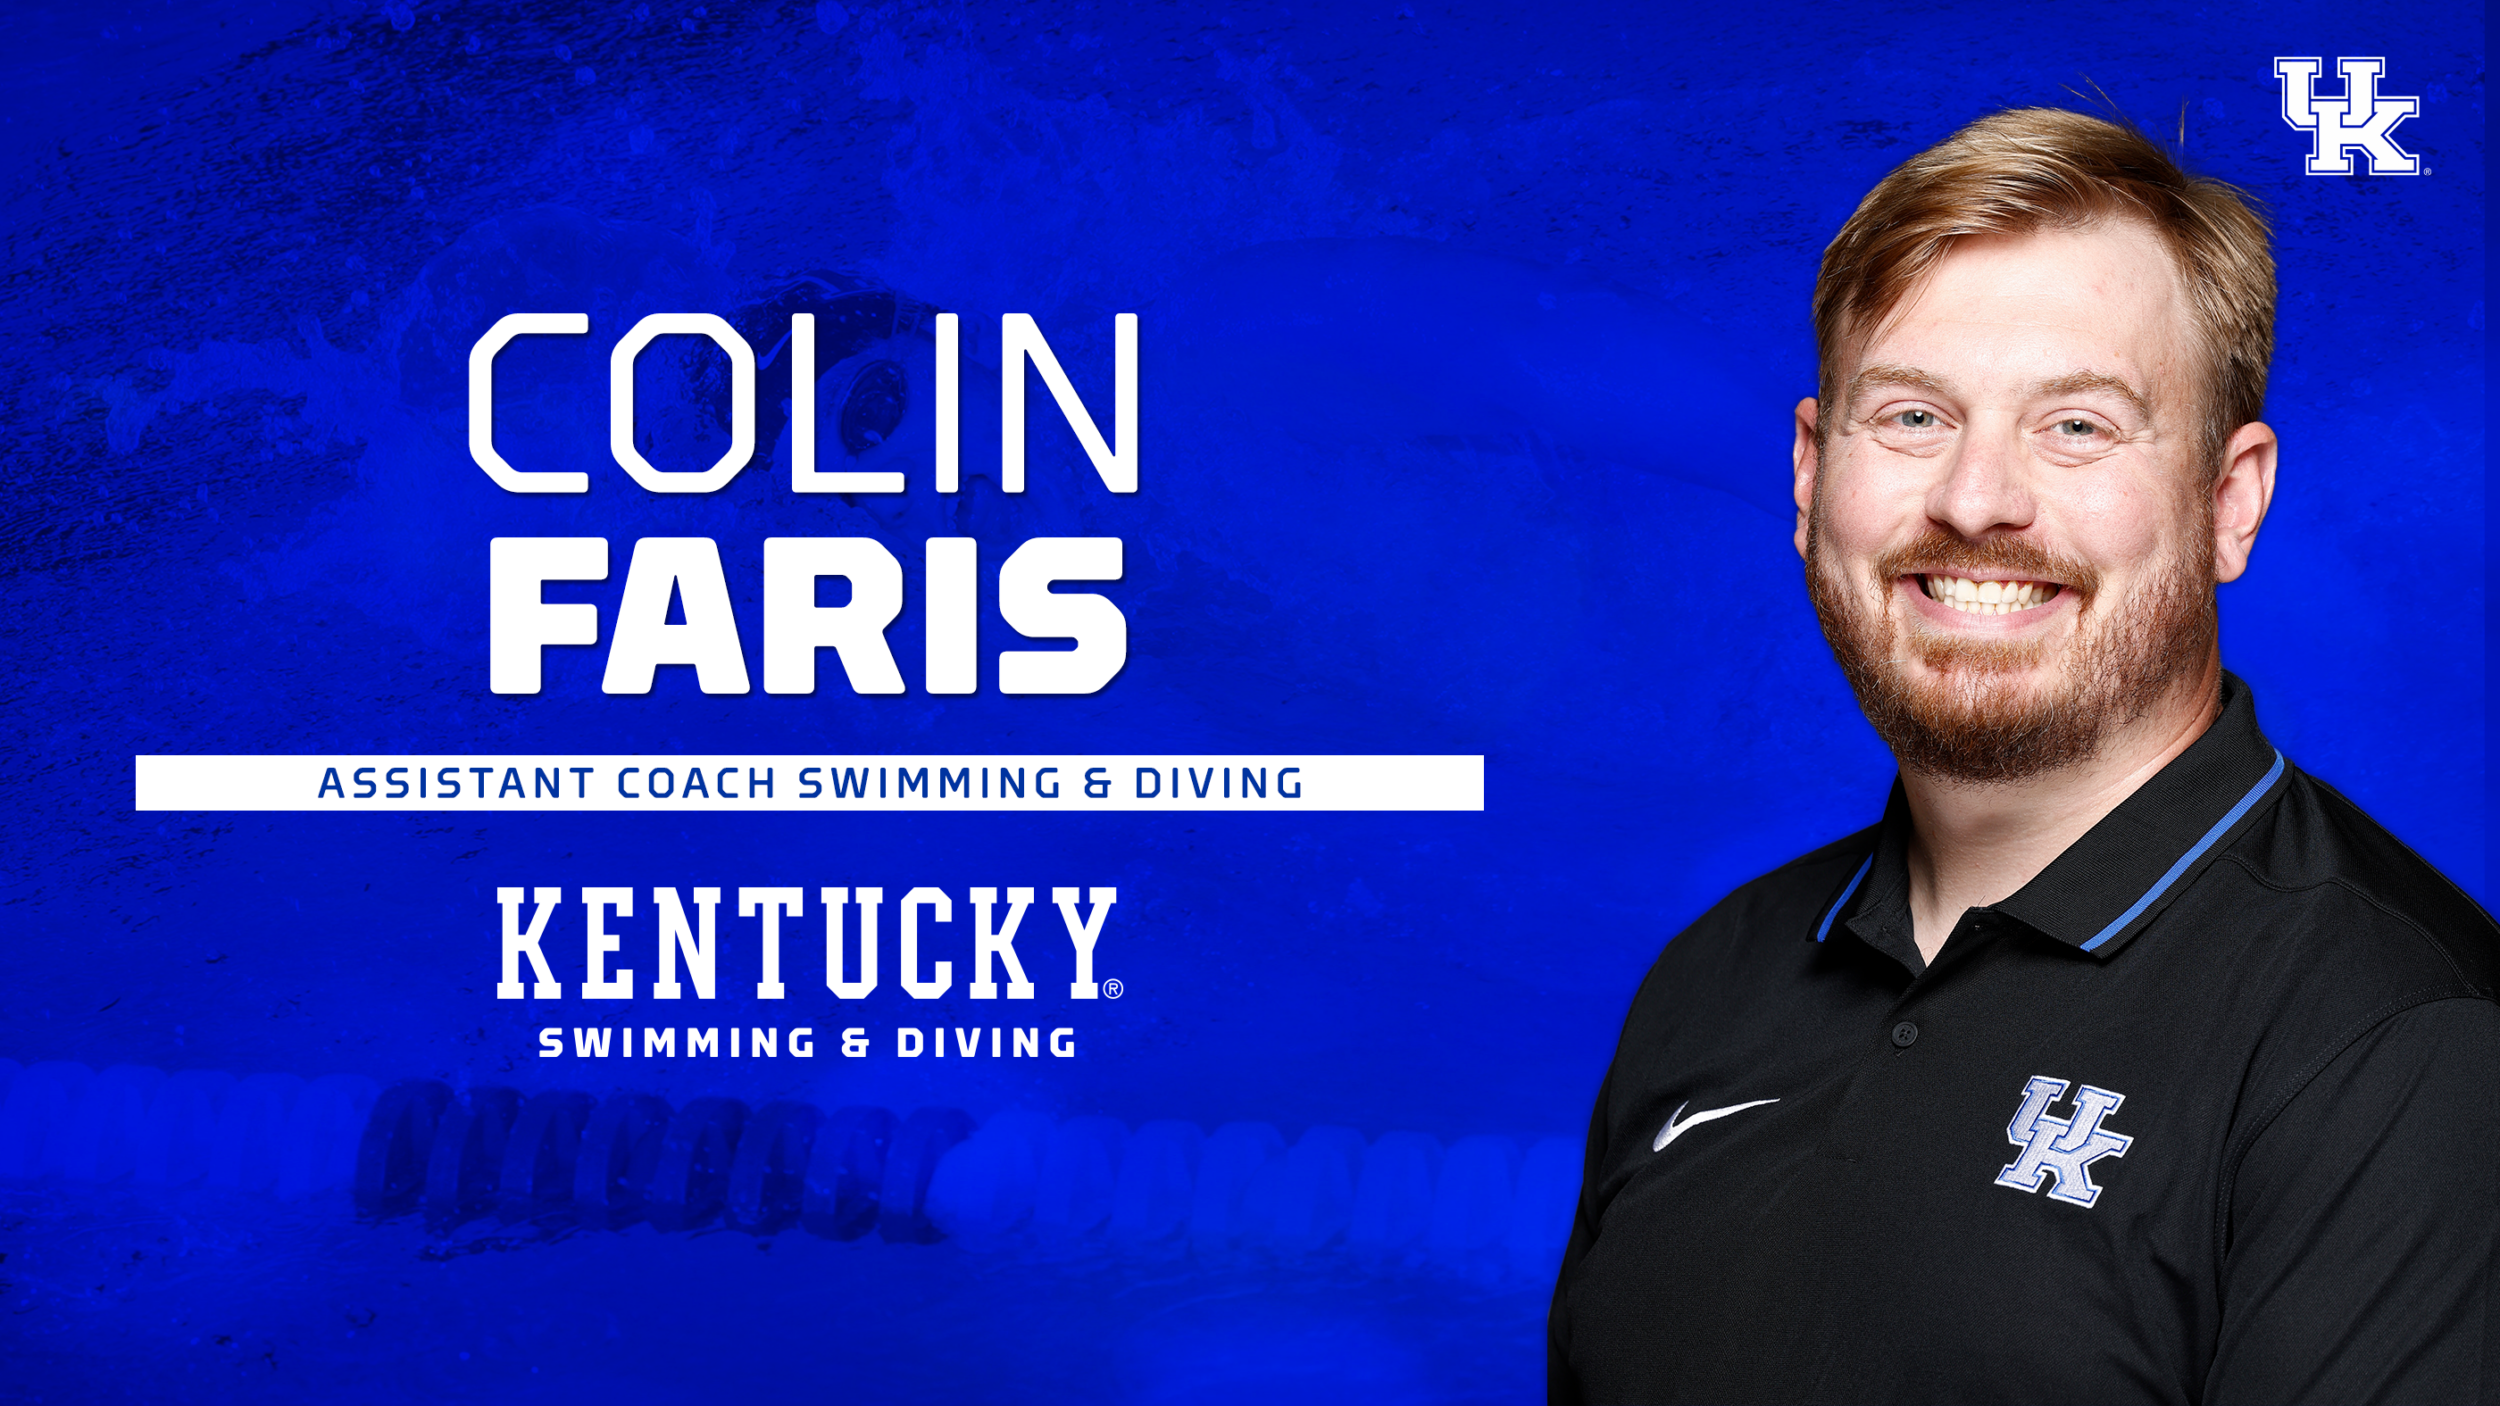 Colin Faris Back in the Bluegrass as Swim & Dive Assistant